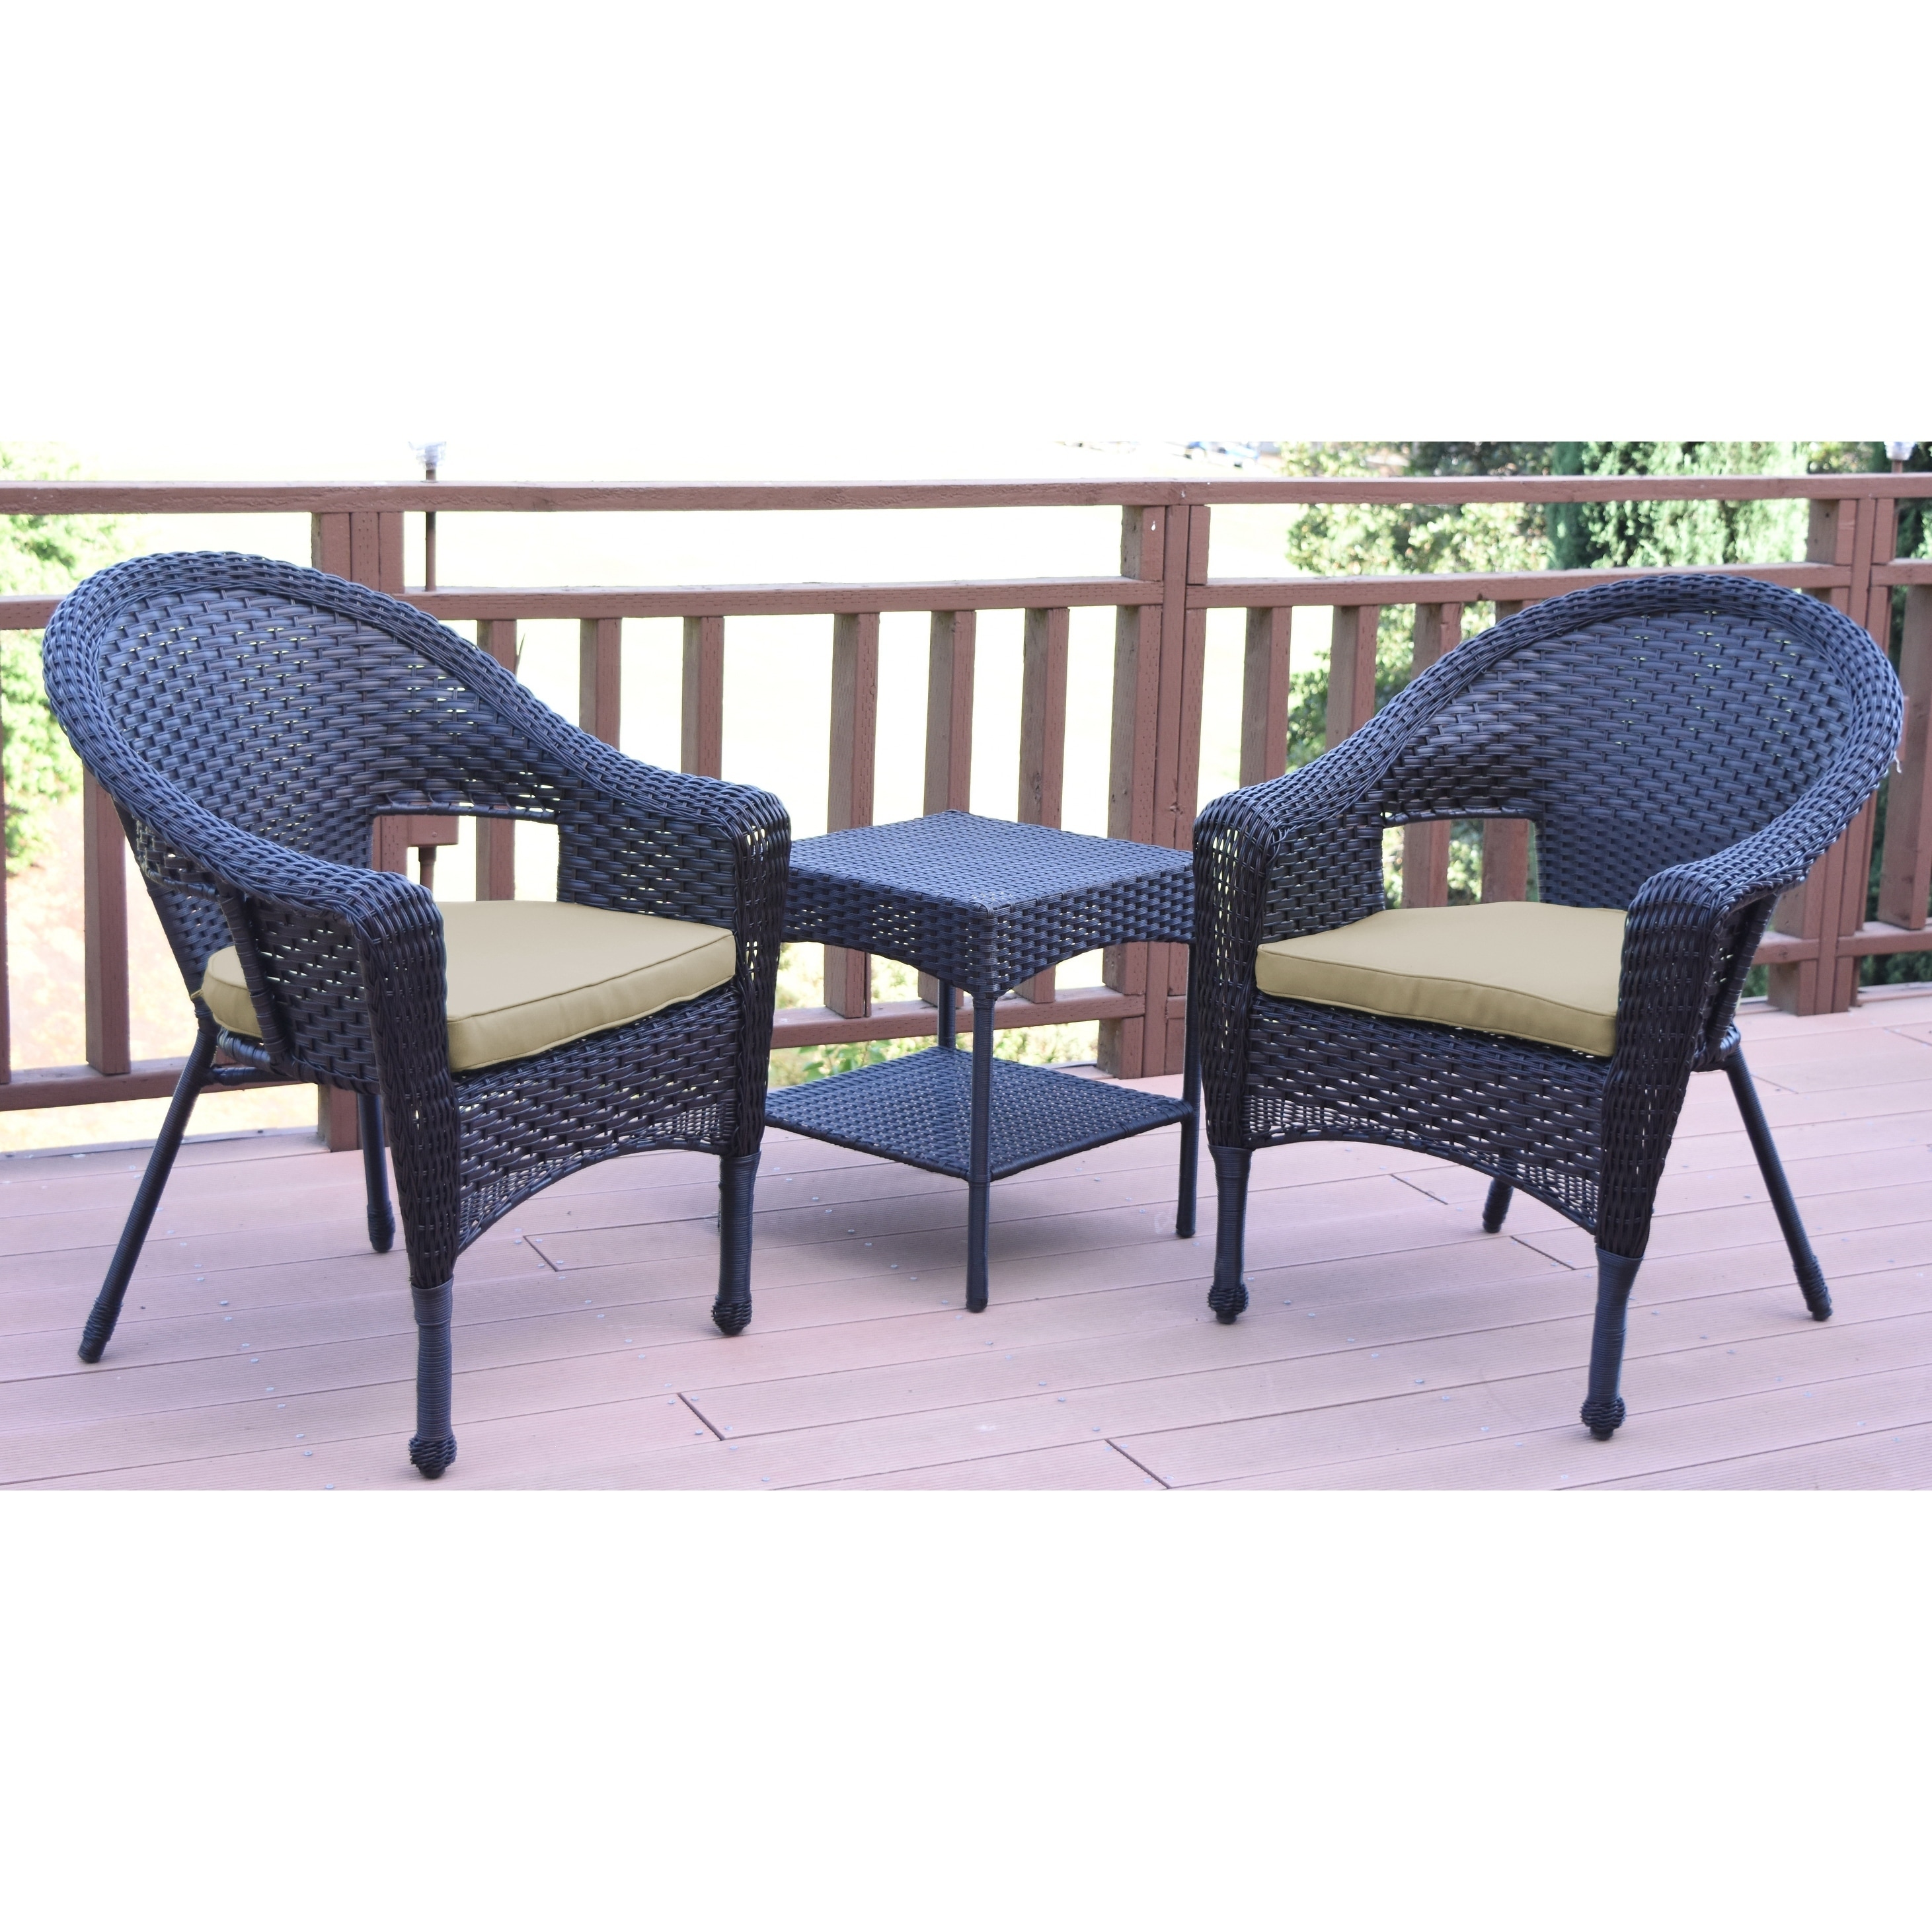 Set Of 3 Espresso Resin Wicker Clark Single Chair With 2 Inch Brown Cushion And End Table